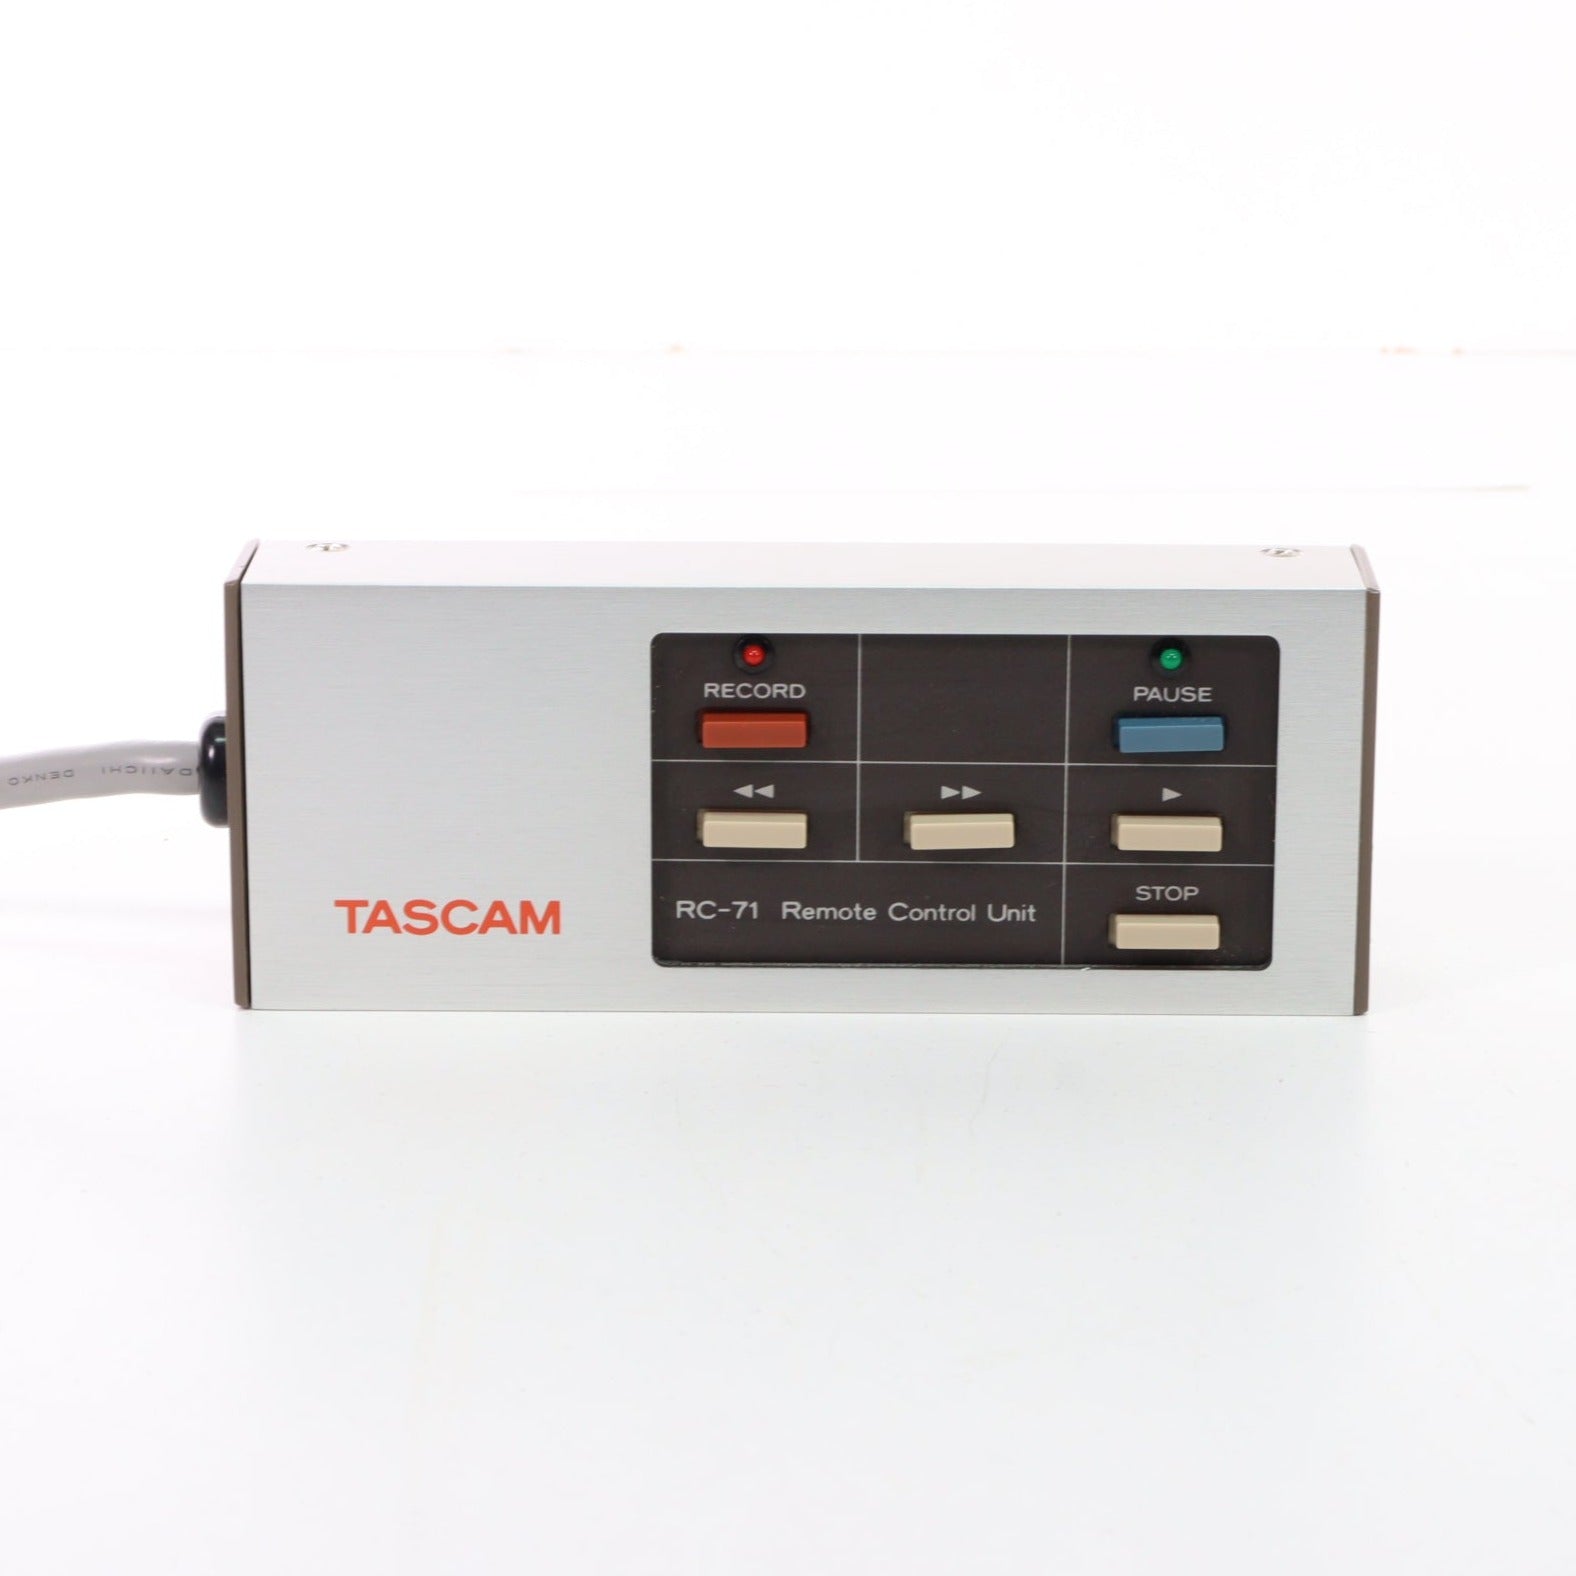 The Tascam 34-B 1?4 4 track reel to reel recorder improved on the